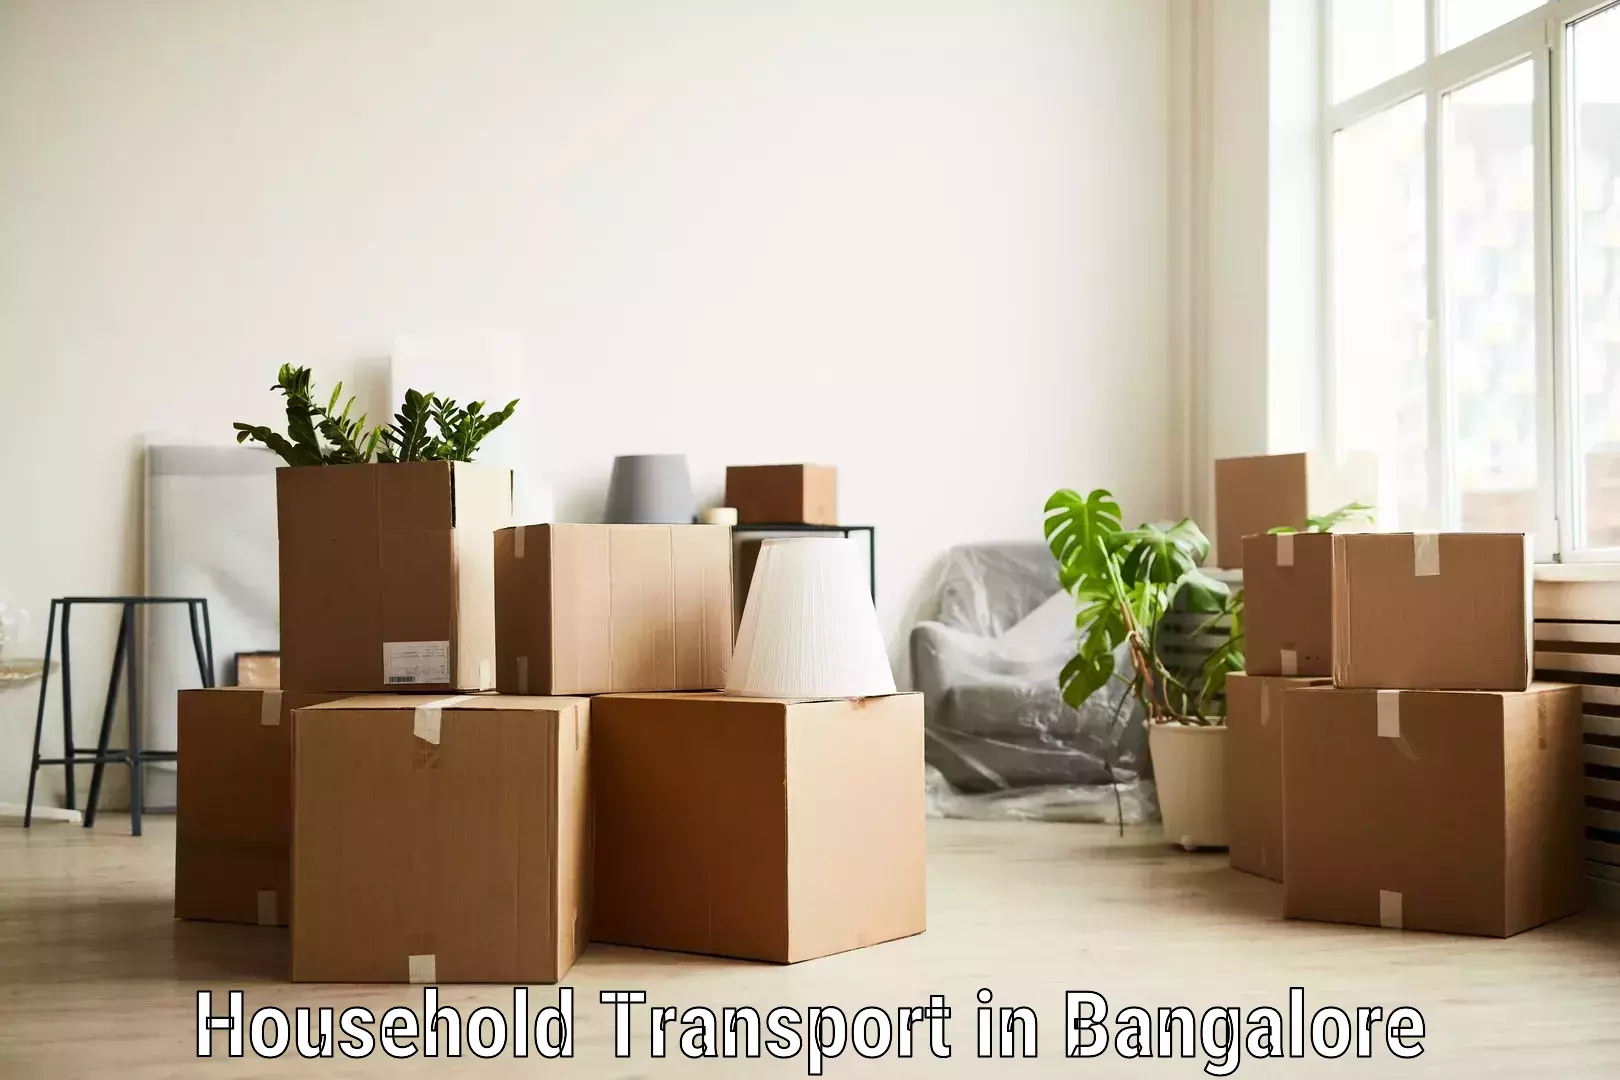 Furniture moving experts in Bangalore